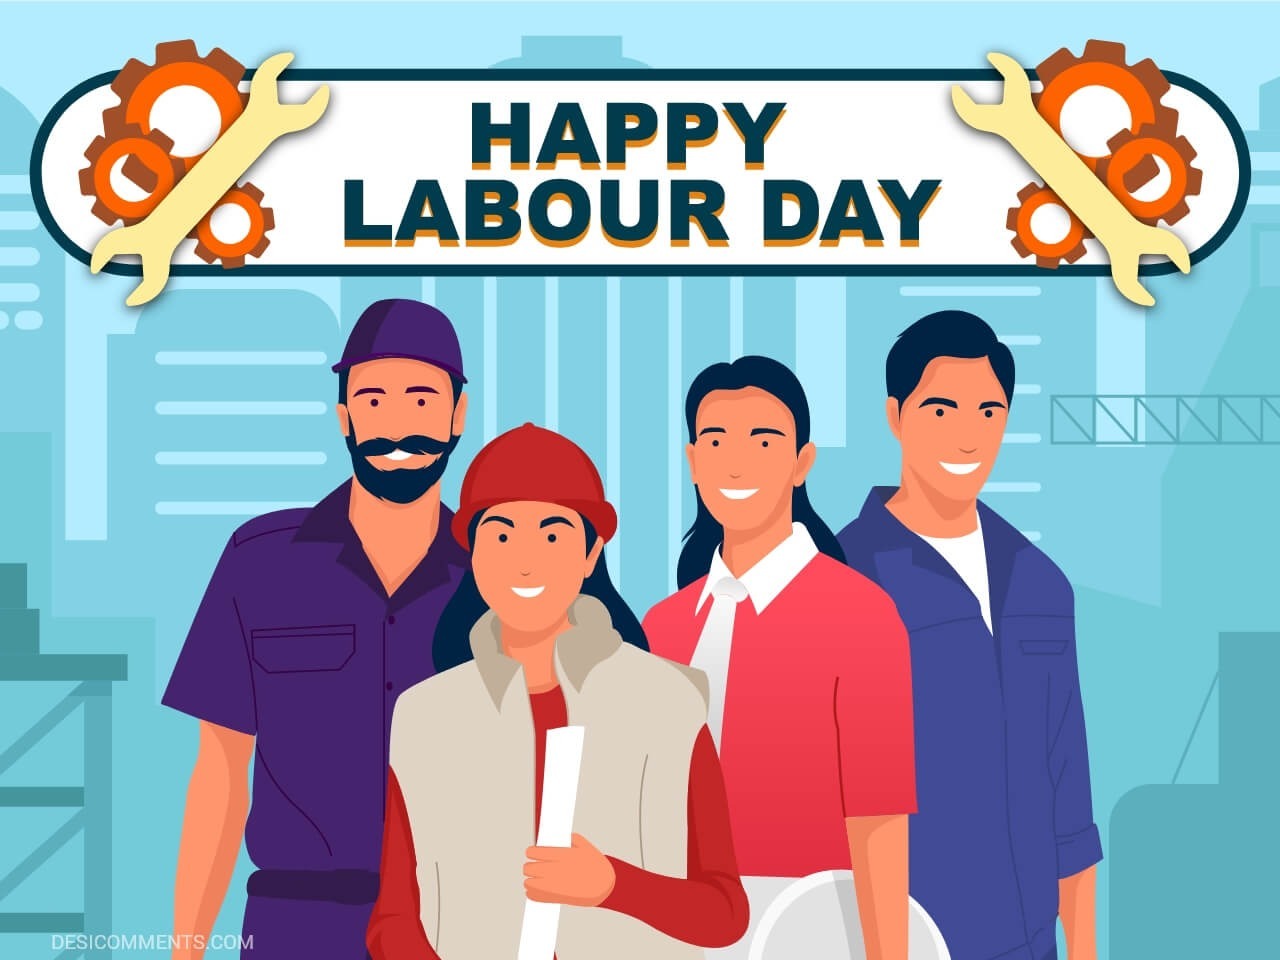 Happy labor day wallpaper Vector Image  1563506  StockUnlimited